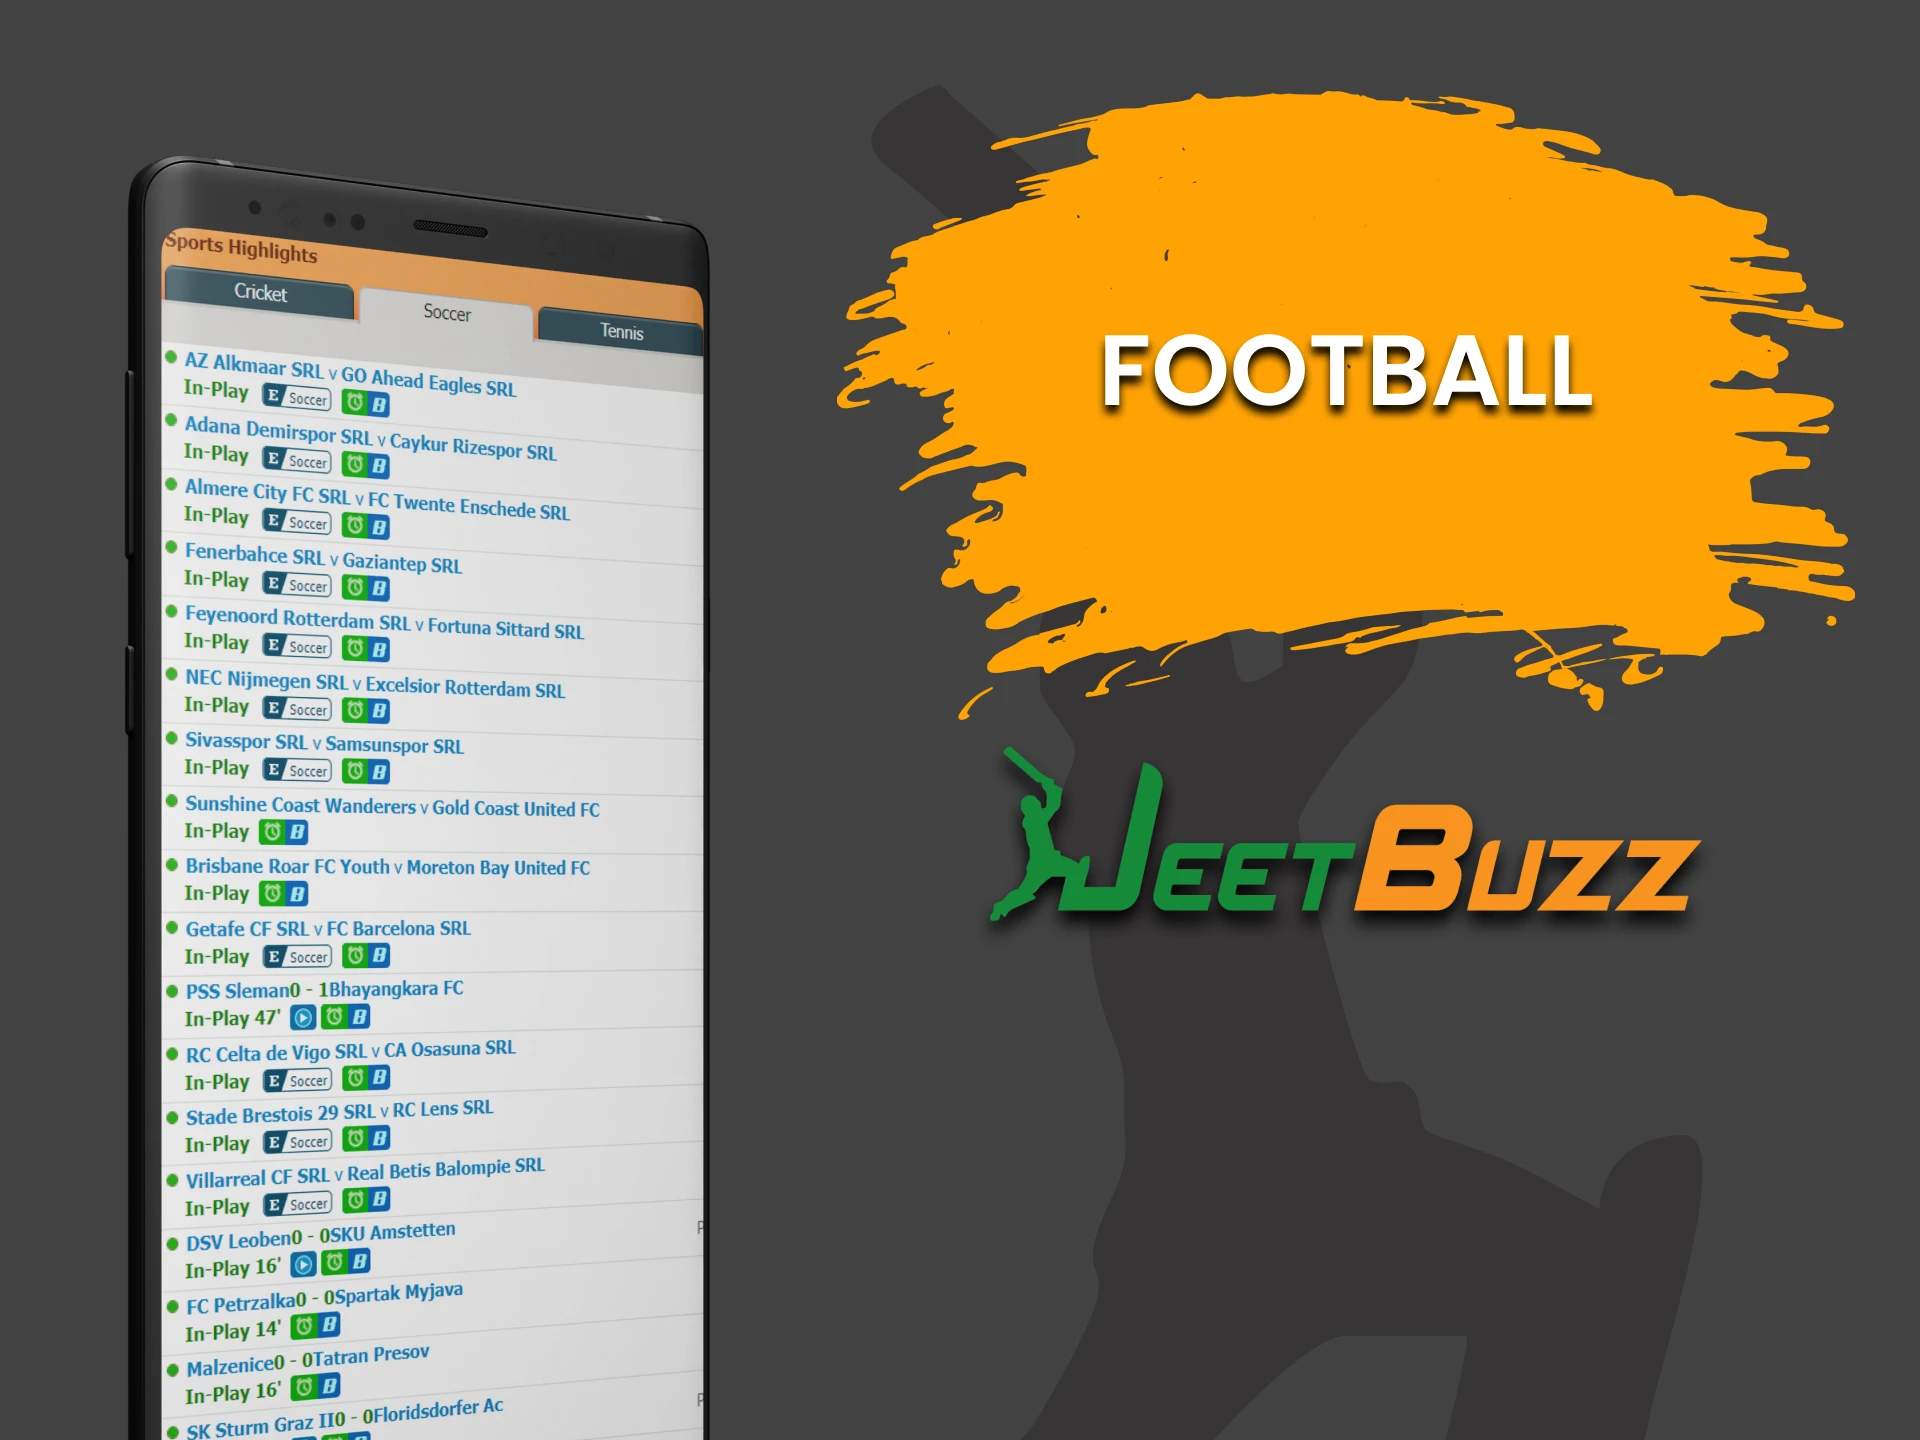 For sports betting on the JeetBuzz app, select Football.